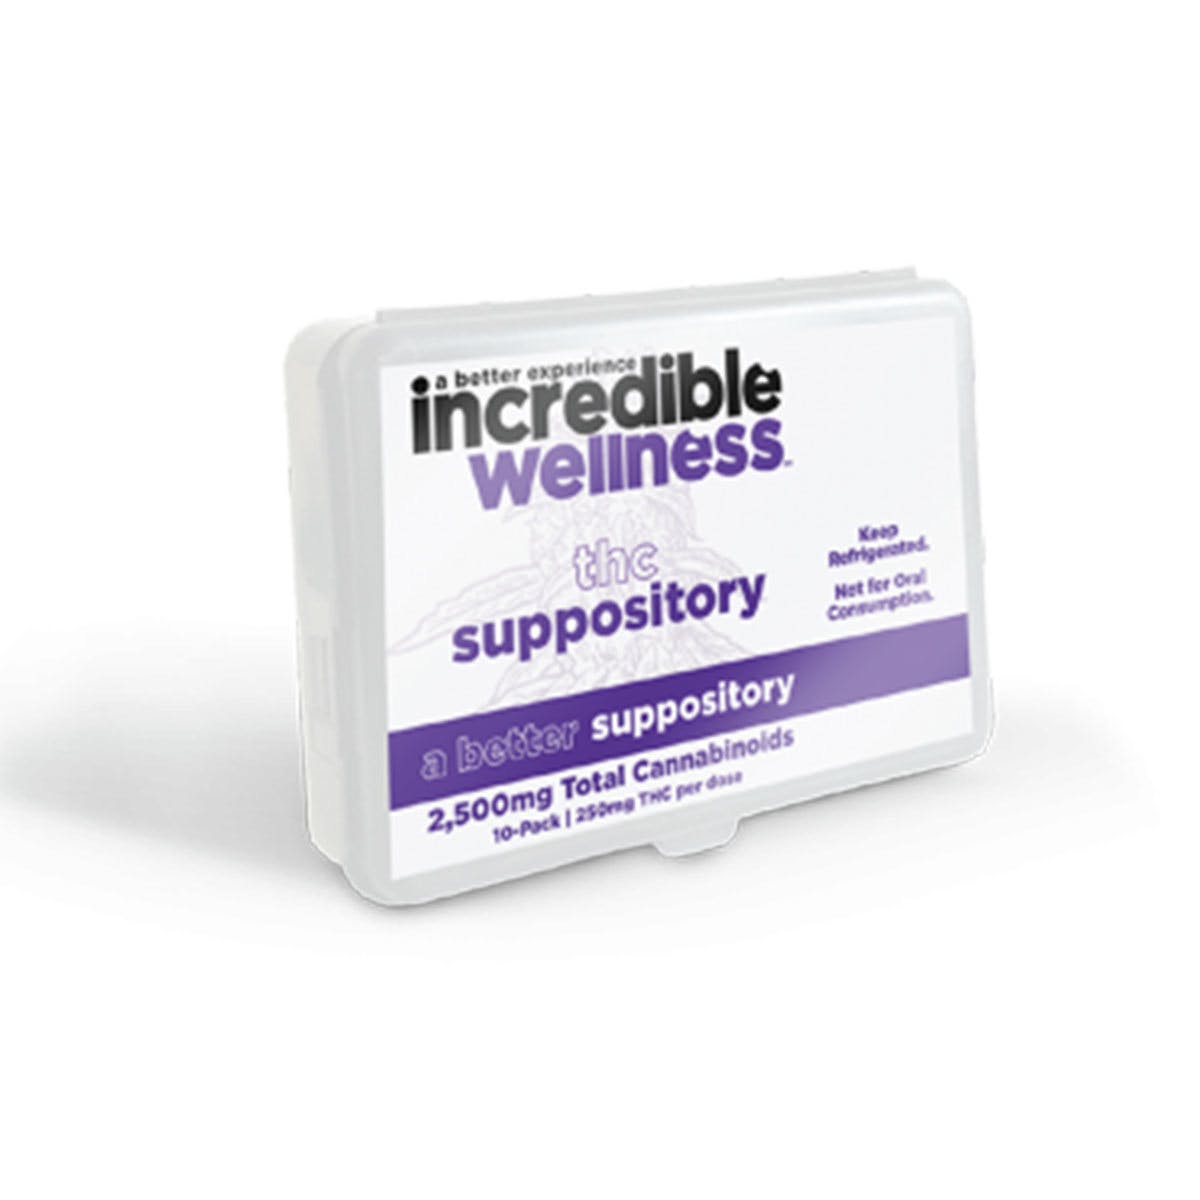 THC Suppository 2500mg - MED